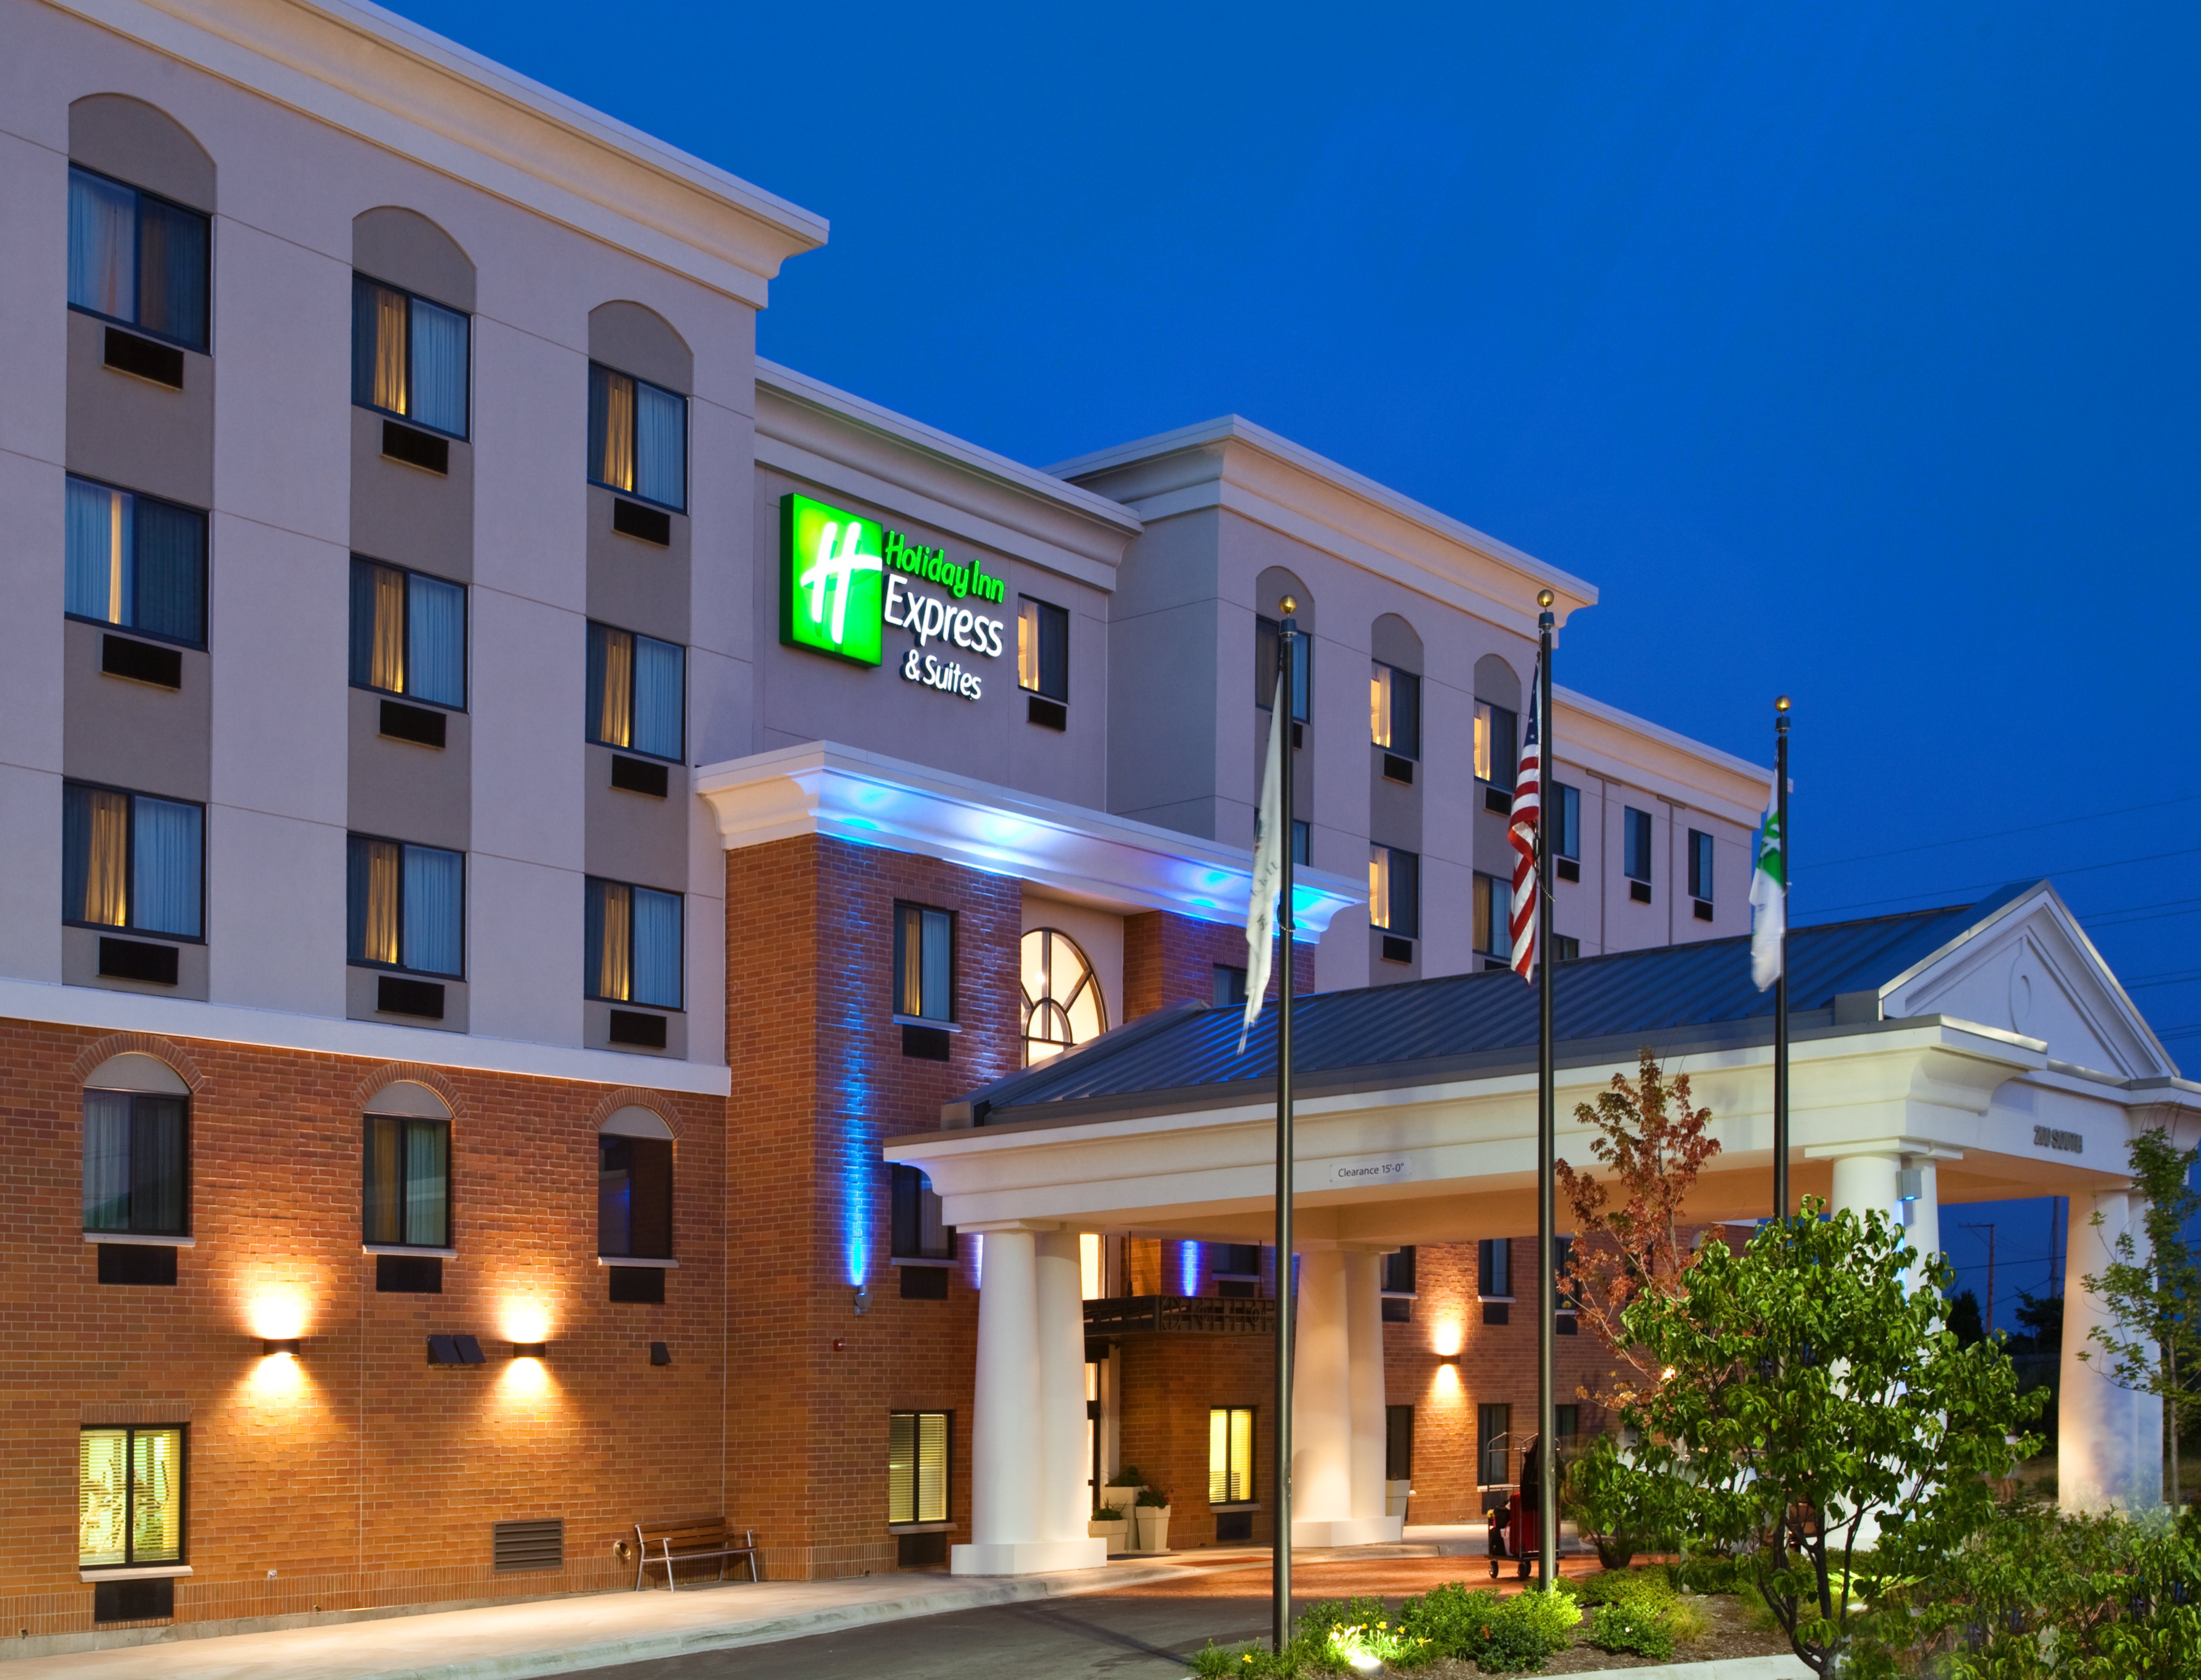 Stay with Holiday Inn Express & Suites Chicago West-O'Hare Arpt!